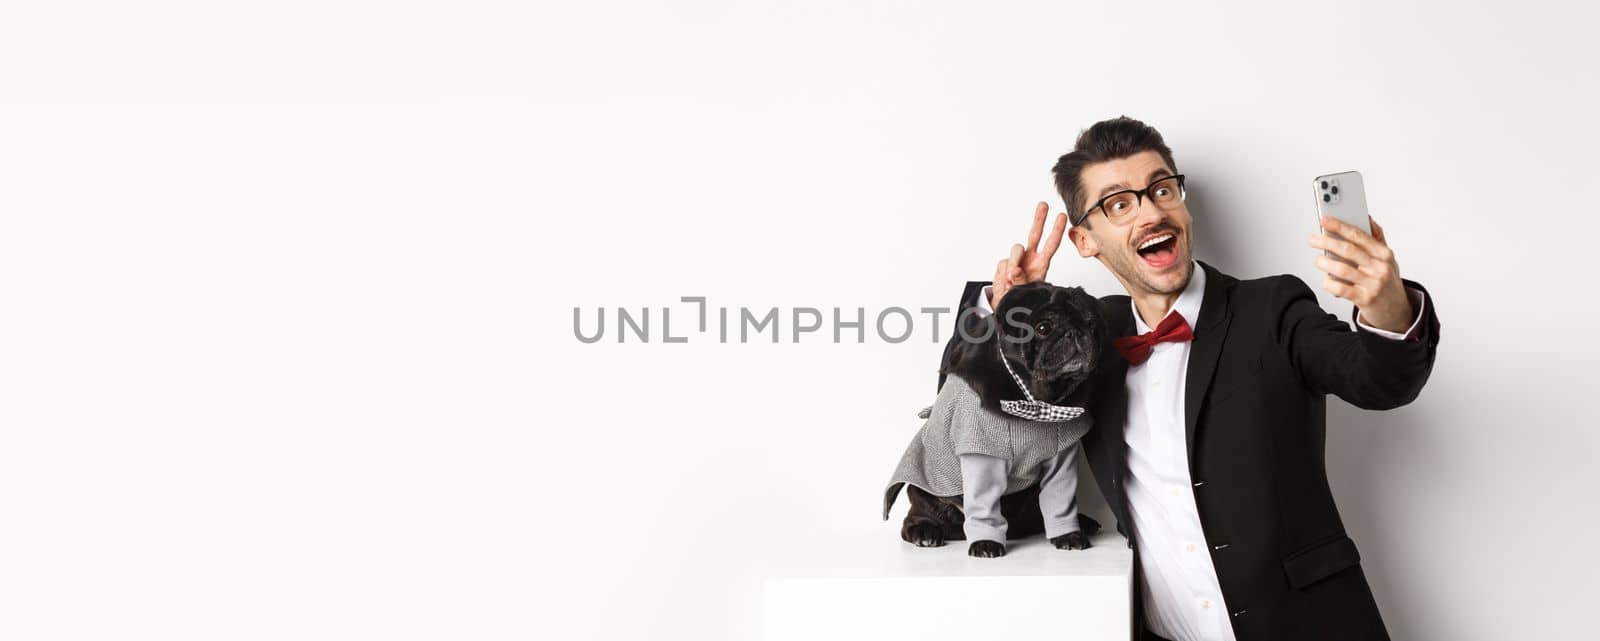 Cheerful dog owner in suit celebrating New Year with dog, taking selfie on smartphone near cute black pug in costume, white background.